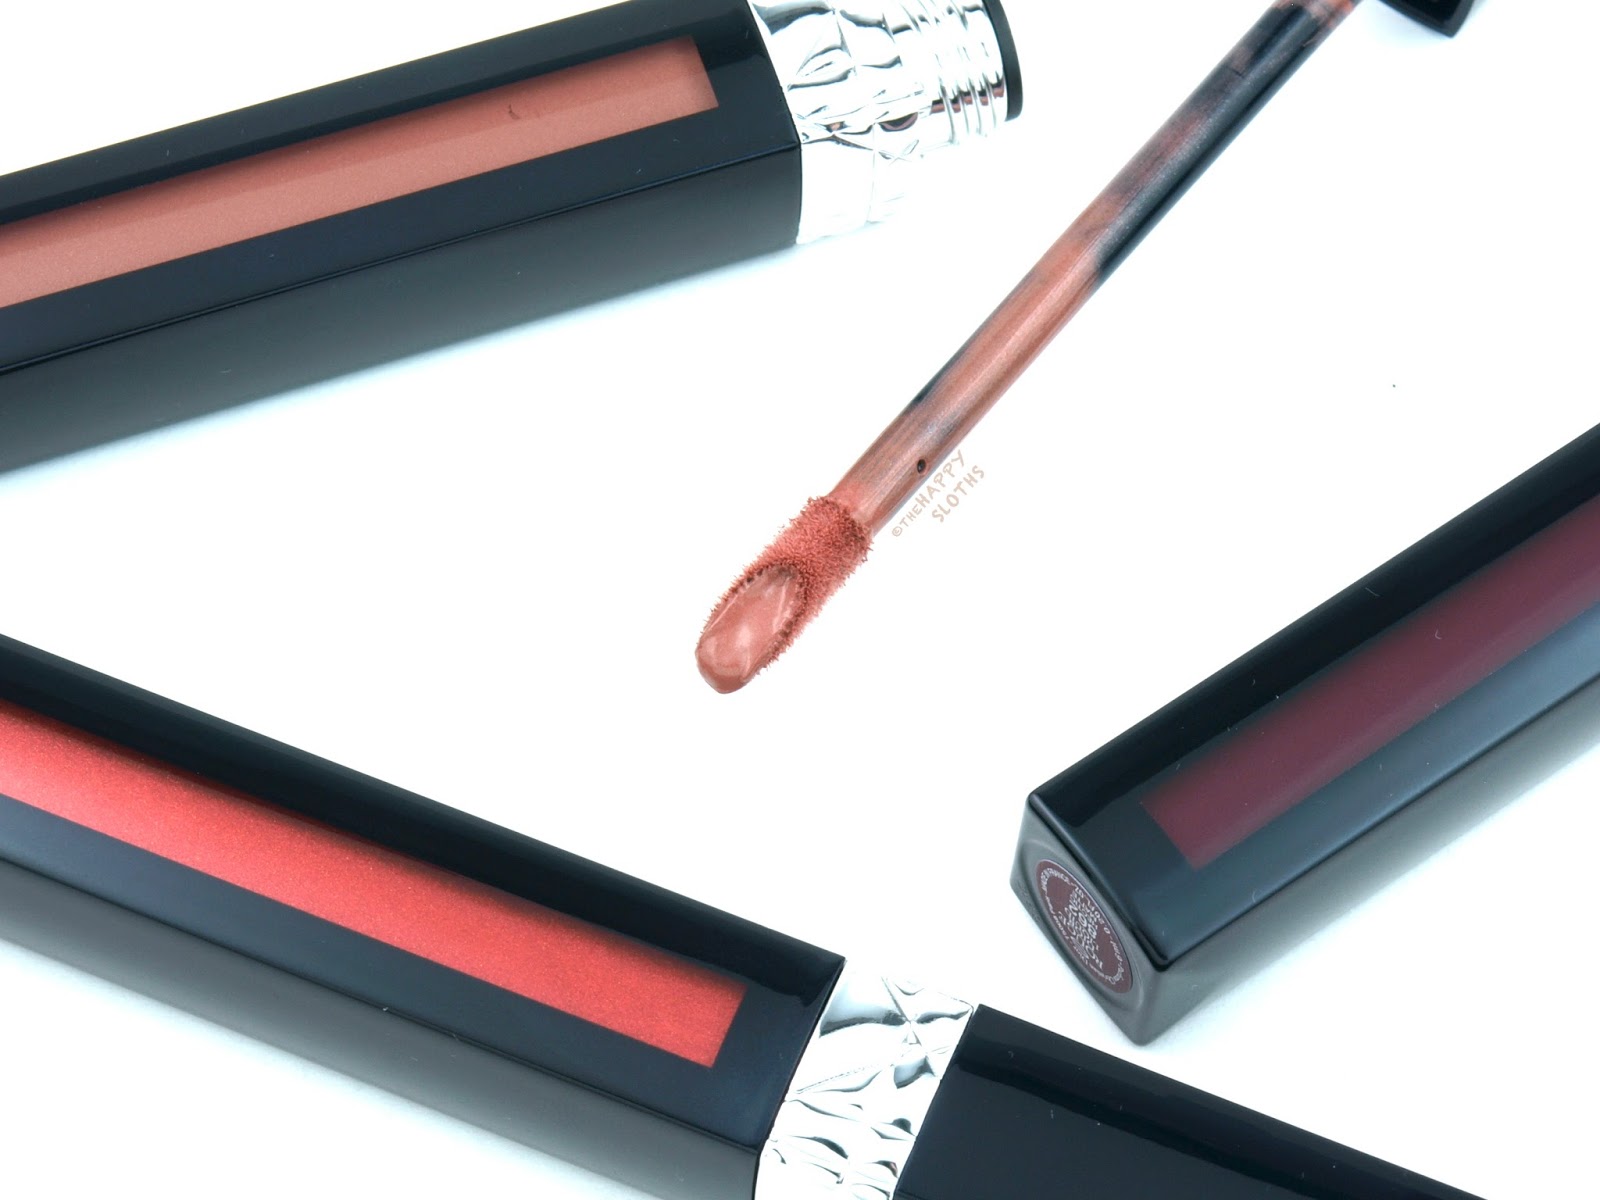 Dior Rouge Dior Liquid Lip Stain: Review and Swatches